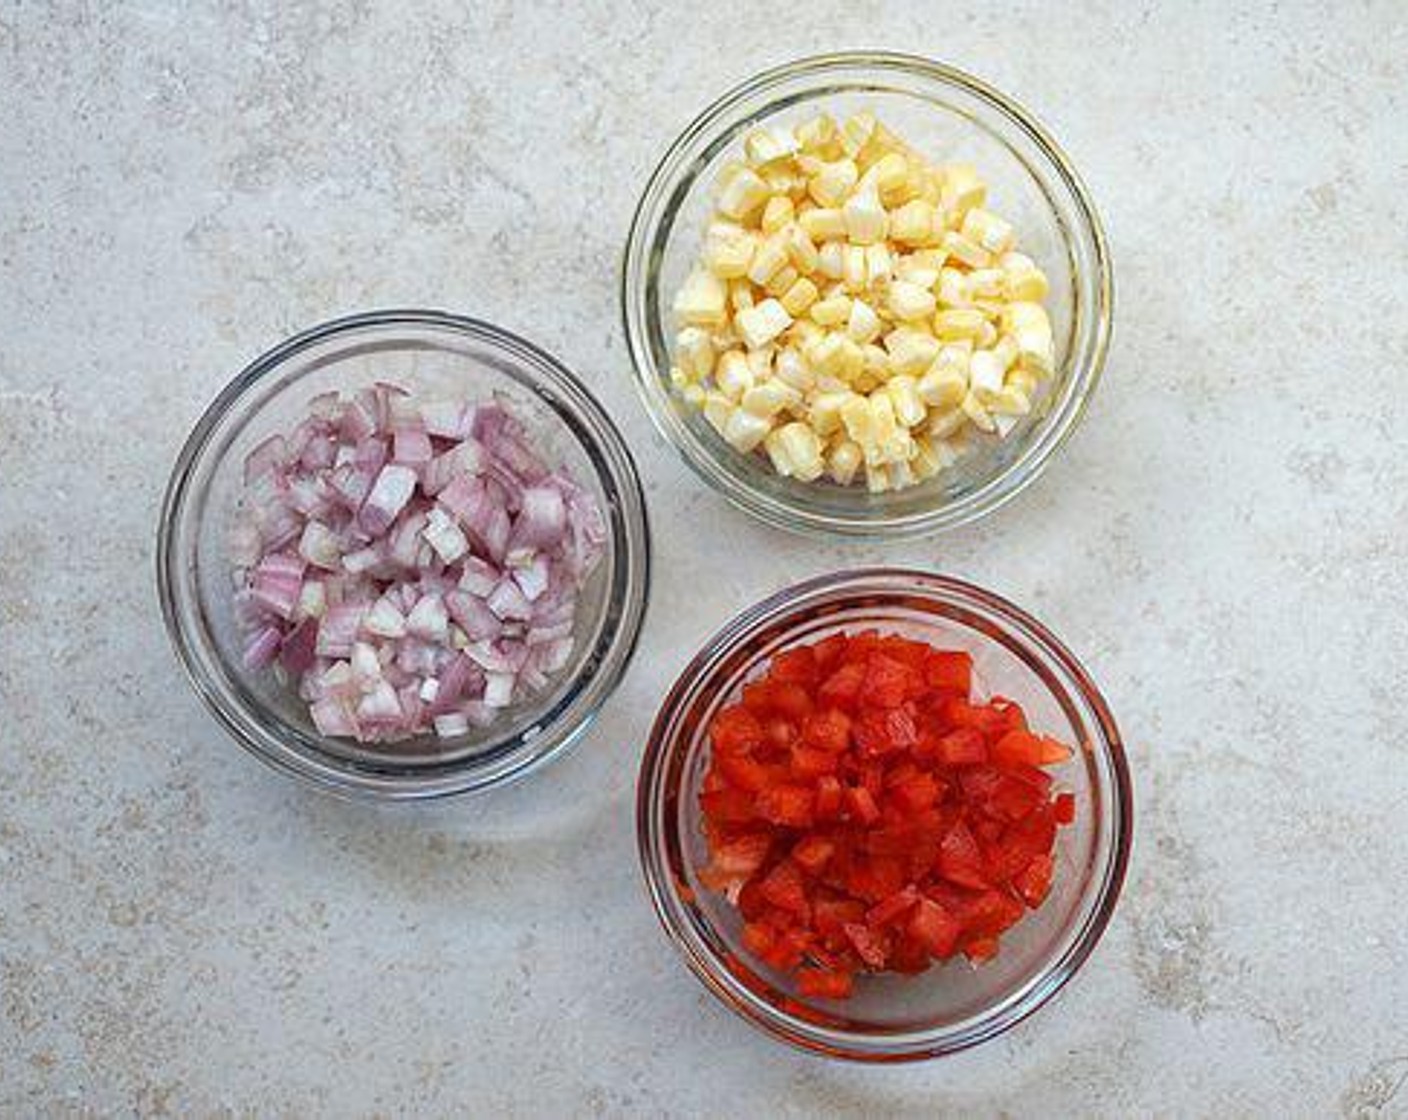 step 4 While quinoa is cooking, prepare your Corn (1/2 cup), shallot and red pepper. Finely dice Shallot (1/2 cup) and Red Bell Pepper (1/2 cup), they should be about the same size as the corn kernels.